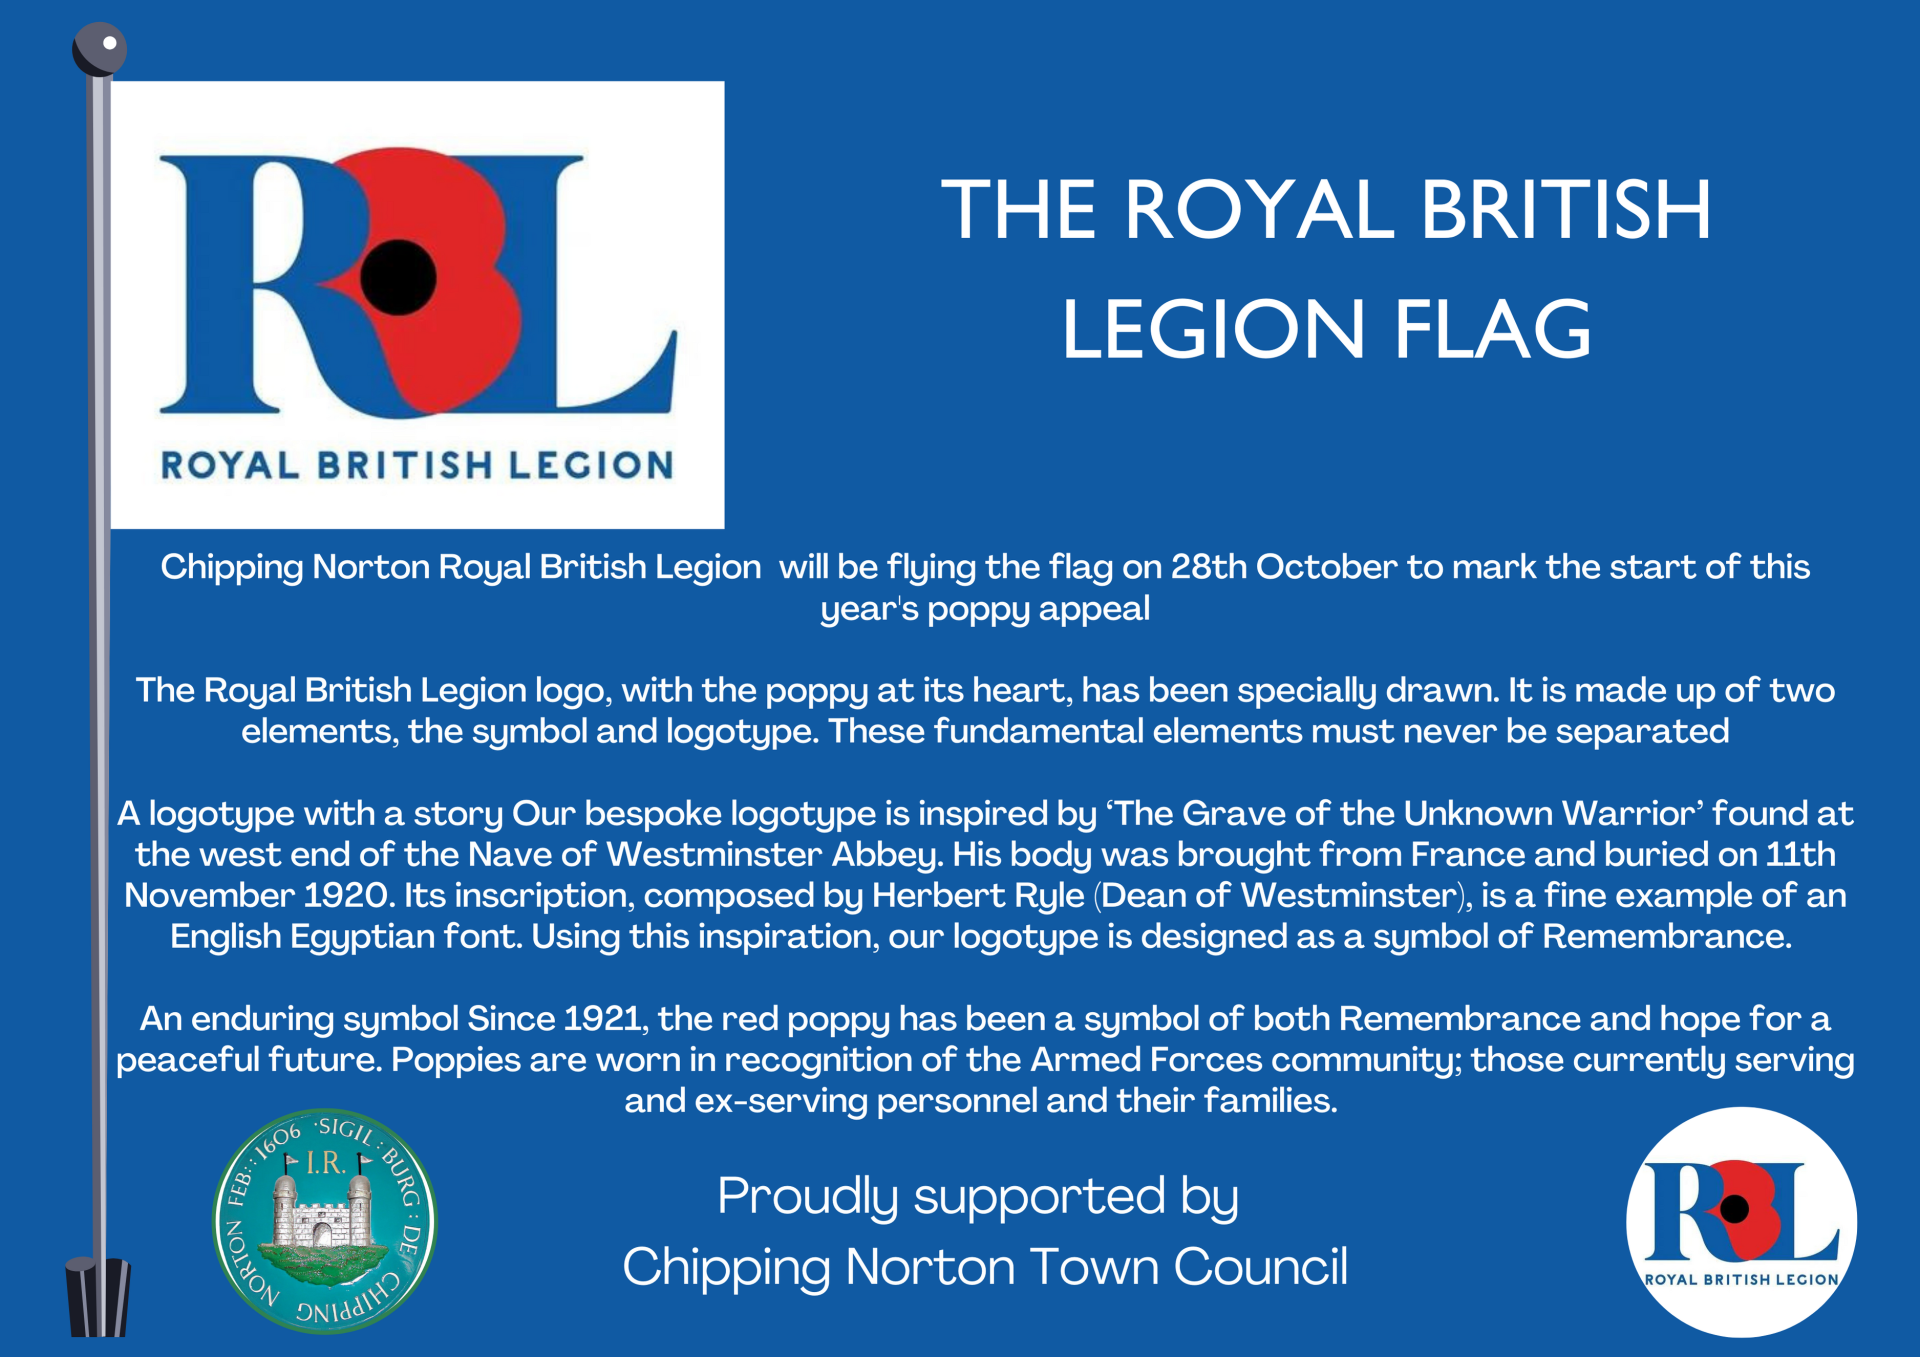 Chipping Norton Royal British Legion  will be flying the flag on 28th October to mark the start of this year's poppy appeal

The Royal British Legion logo, with the poppy at its heart, has been specially drawn. It is made up of two elements, the symbol and logotype. These fundamental elements must never be separated

A logotype with a story Our bespoke logotype is inspired by ‘The Grave of the Unknown Warrior’ found at the west end of the Nave of Westminster Abbey. His body was brought from France and buried on 11th November 1920. Its inscription, composed by Herbert Ryle (Dean of Westminster), is a fine example of an English Egyptian font. Using this inspiration, our logotype is designed as a symbol of Remembrance. 

An enduring symbol Since 1921, the red poppy has been a symbol of both Remembrance and hope for a peaceful future. Poppies are worn in recognition of the Armed Forces community; those currently serving and ex-serving personnel and their families. 